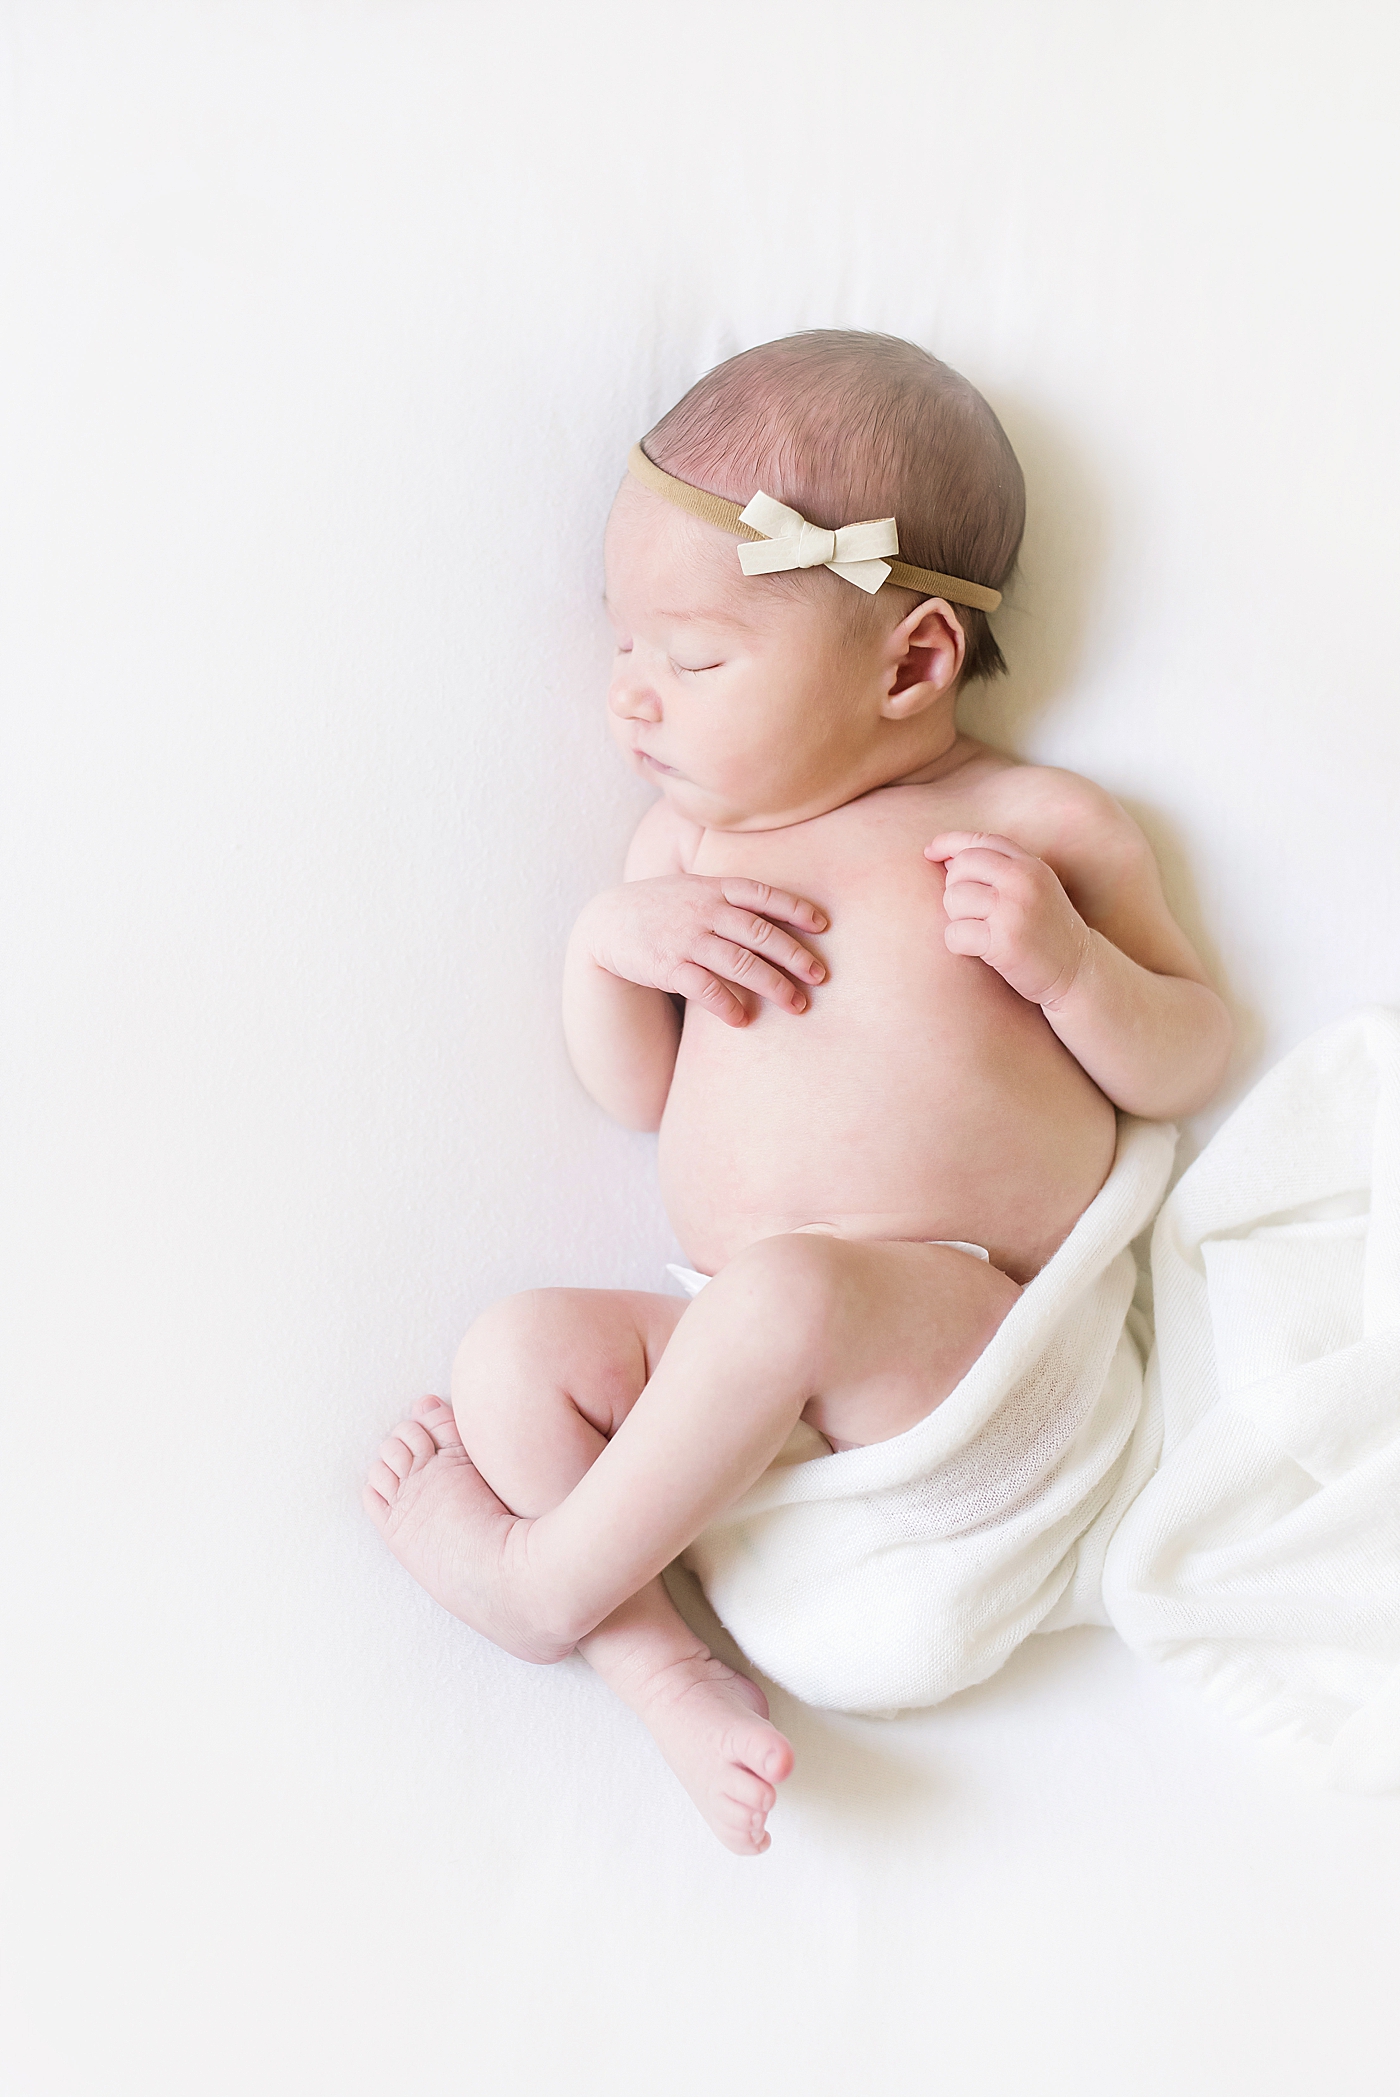 Sleeping newborn baby girl with a bow in a white swaddle | Photo by Anna Wisjo Photography 